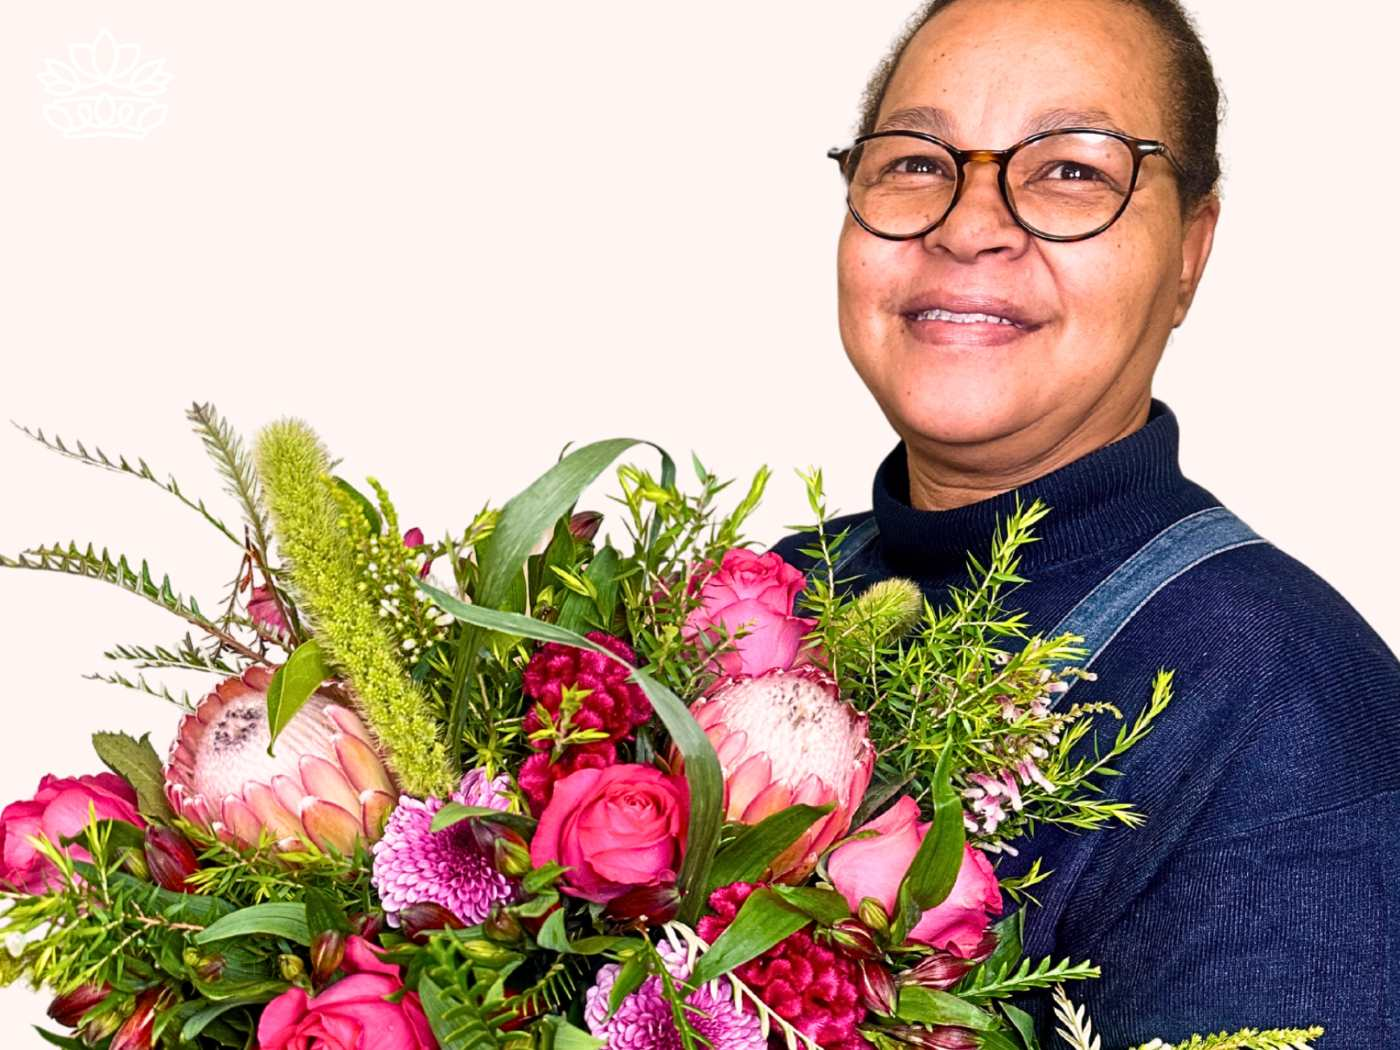 Smiling florist holding a vibrant bouquet from the Florist Choice Bouquets Collection, featuring a mix of pink roses, proteas, and lush greenery, showcasing expertise and craftsmanship. Fabulous Flowers and Gifts.